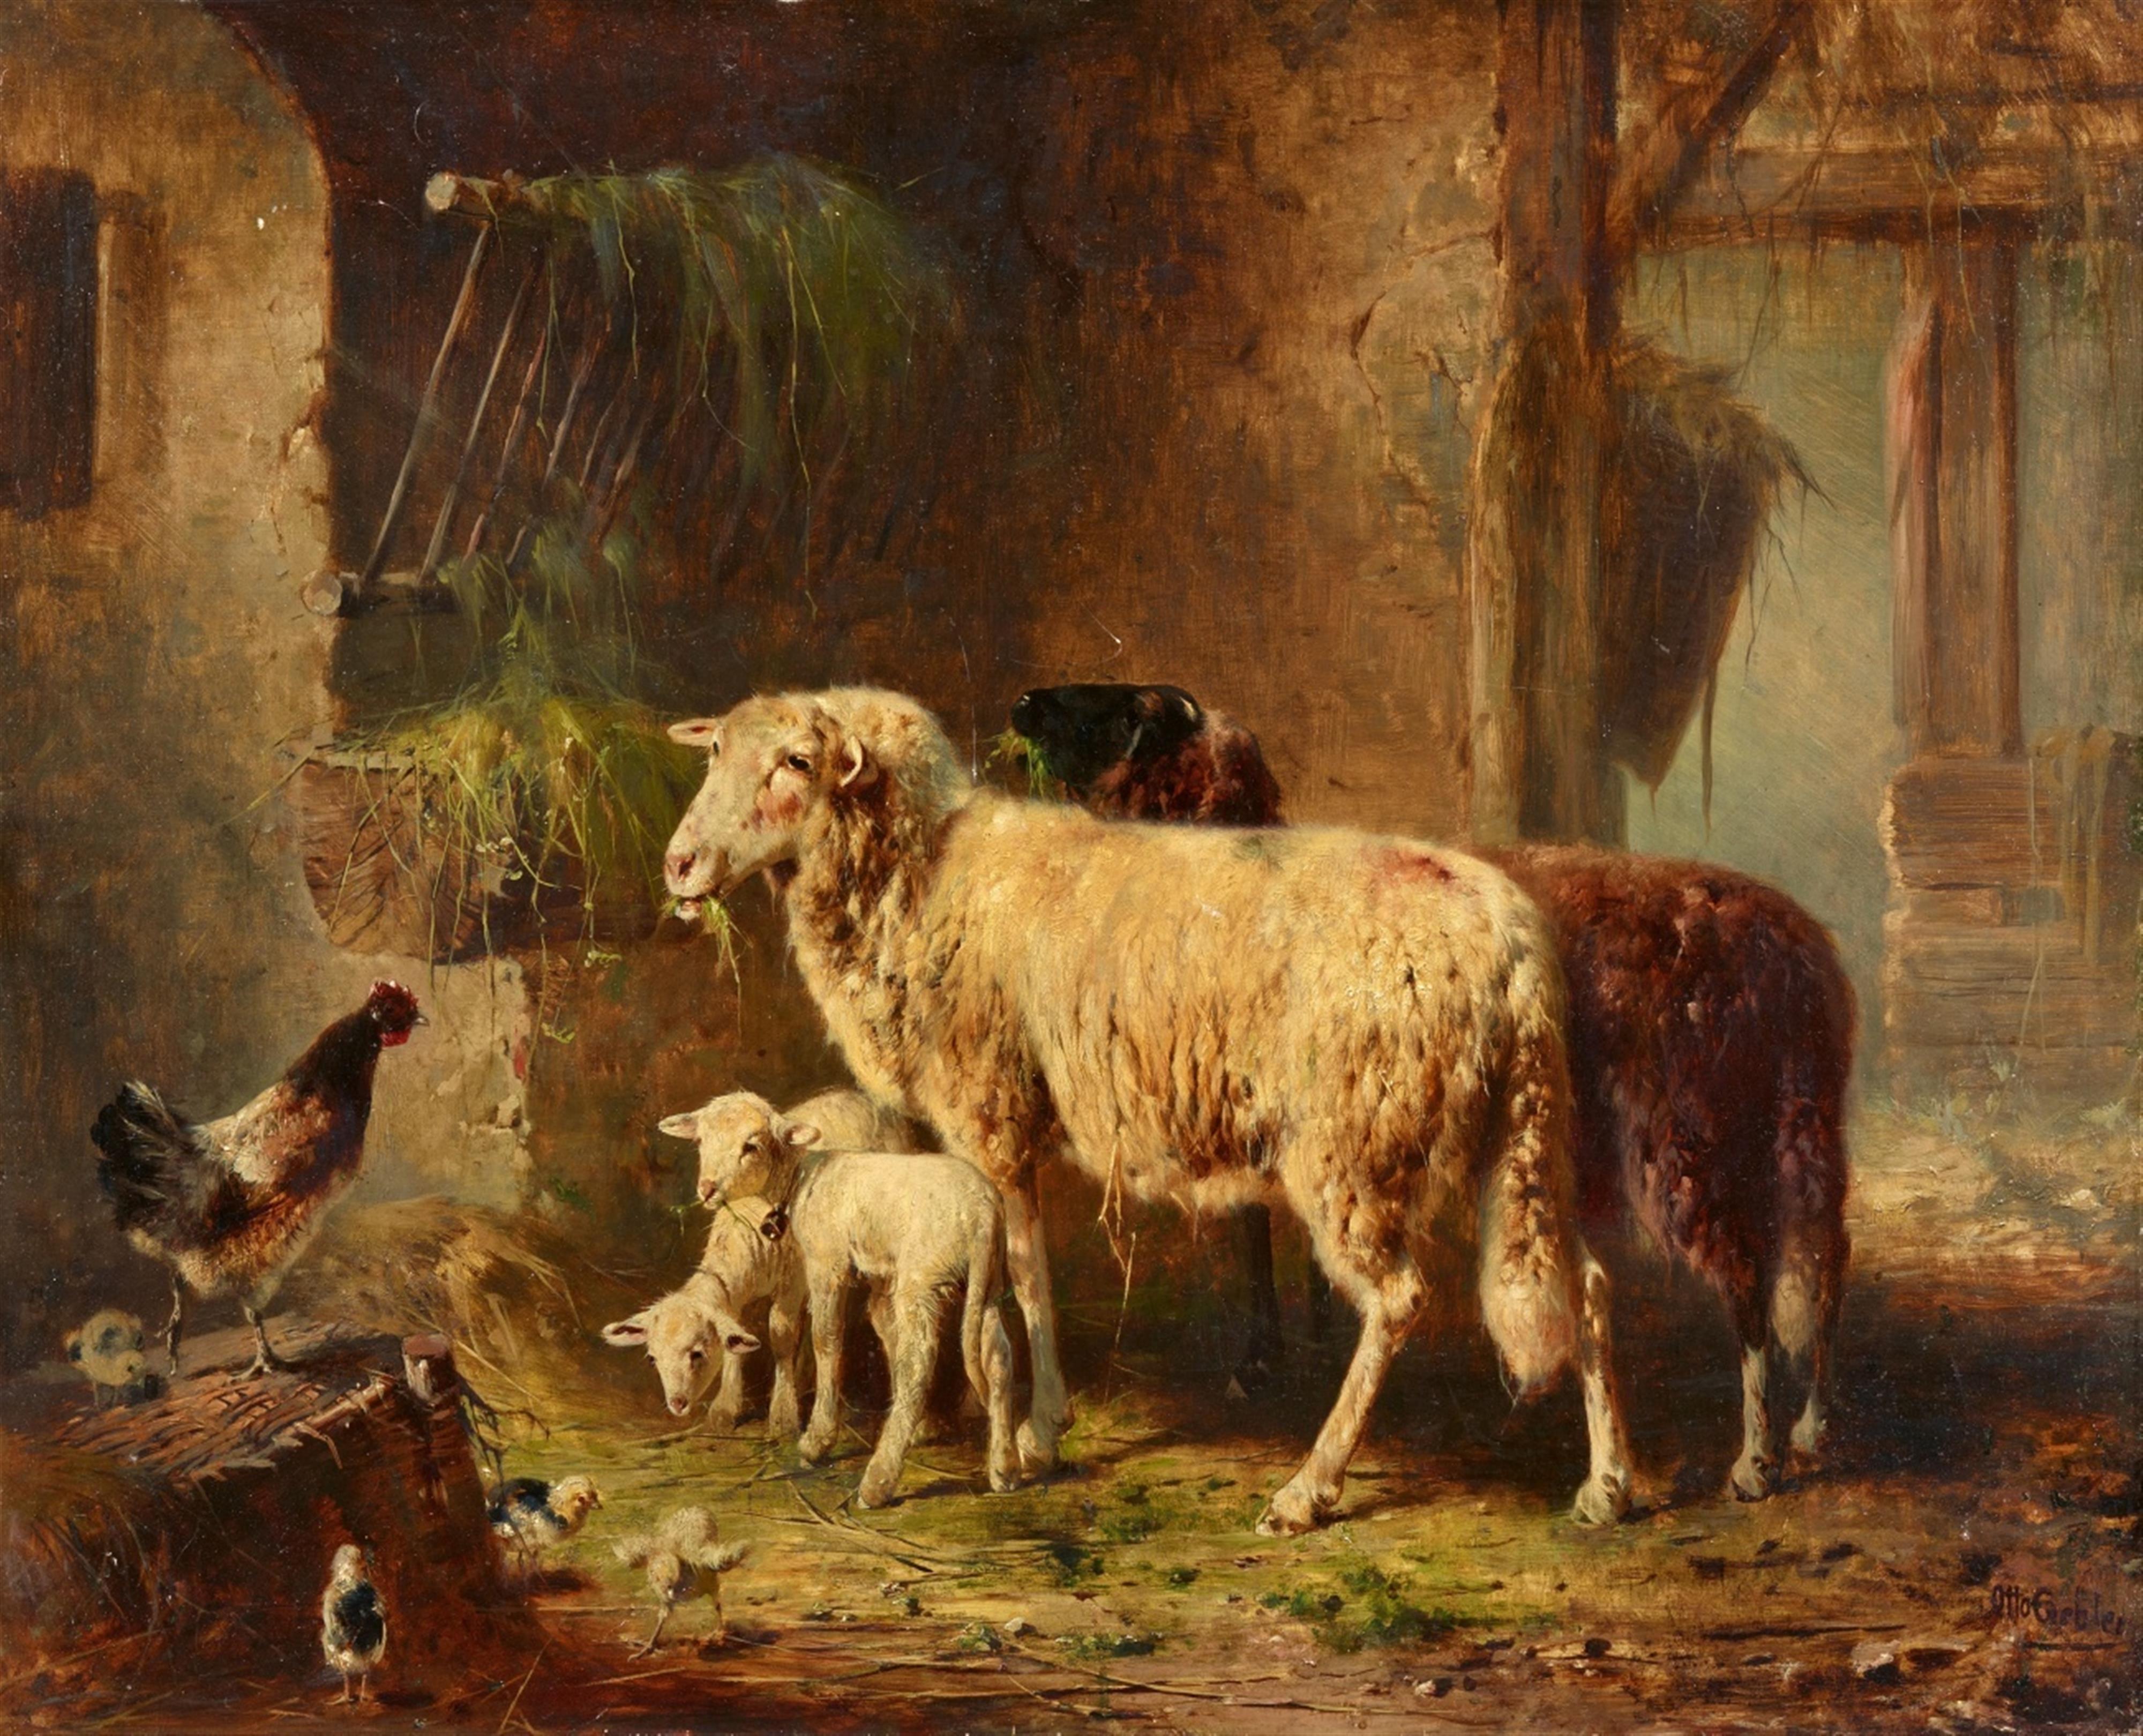 Otto Friedrich Gebler - Stable with Sheep and Chickens - image-1